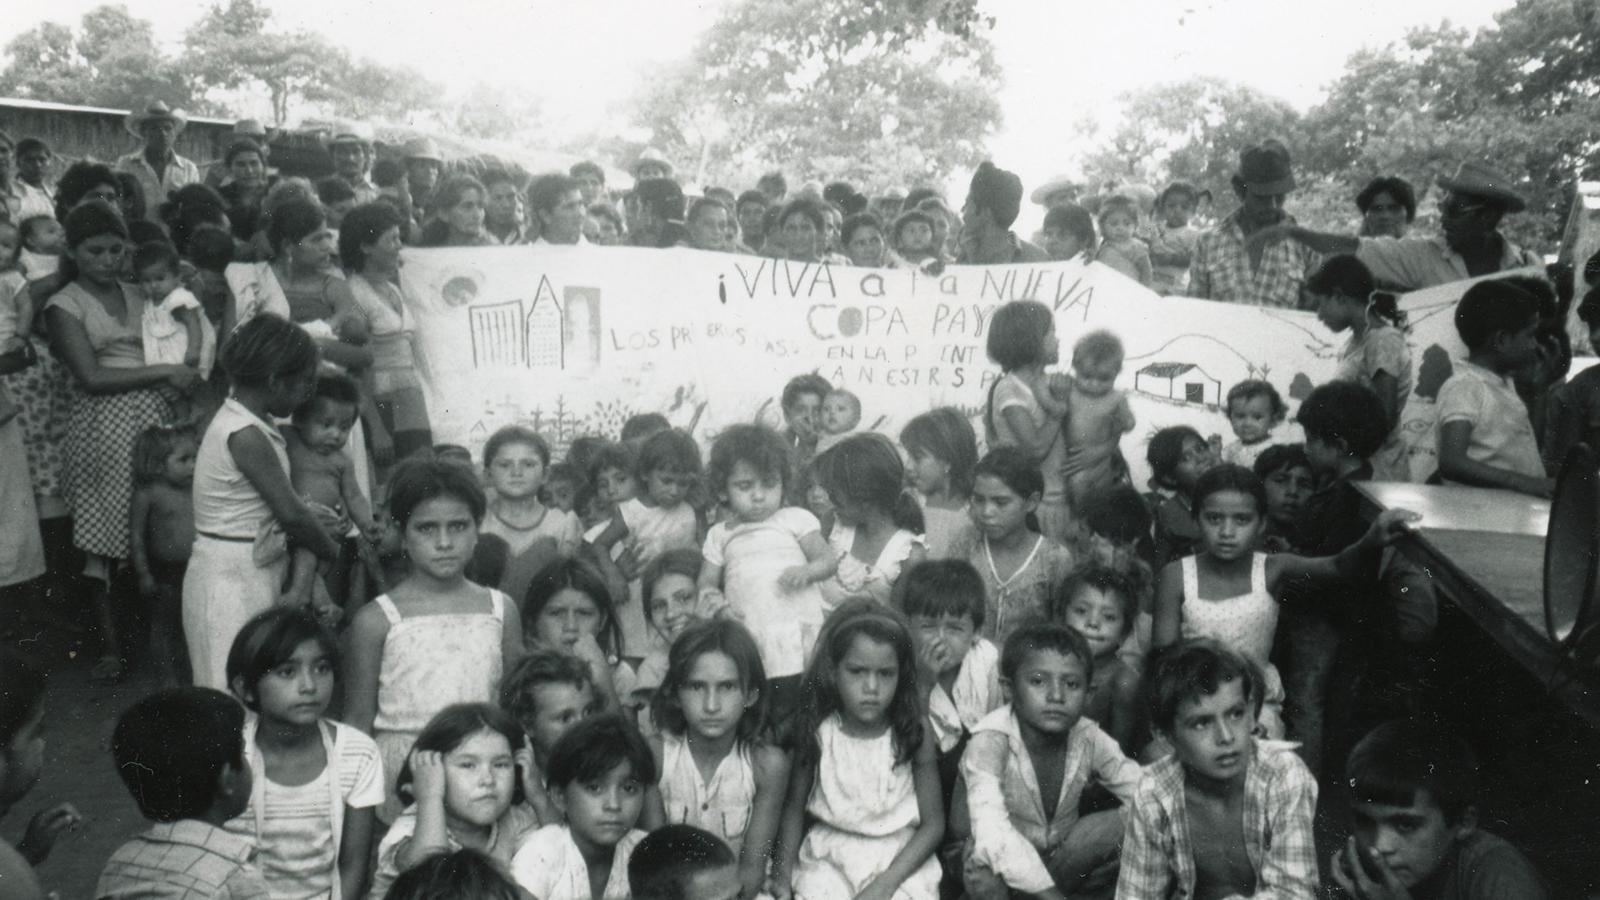 The village of Copapayo sitting in front of a banner from Columbus